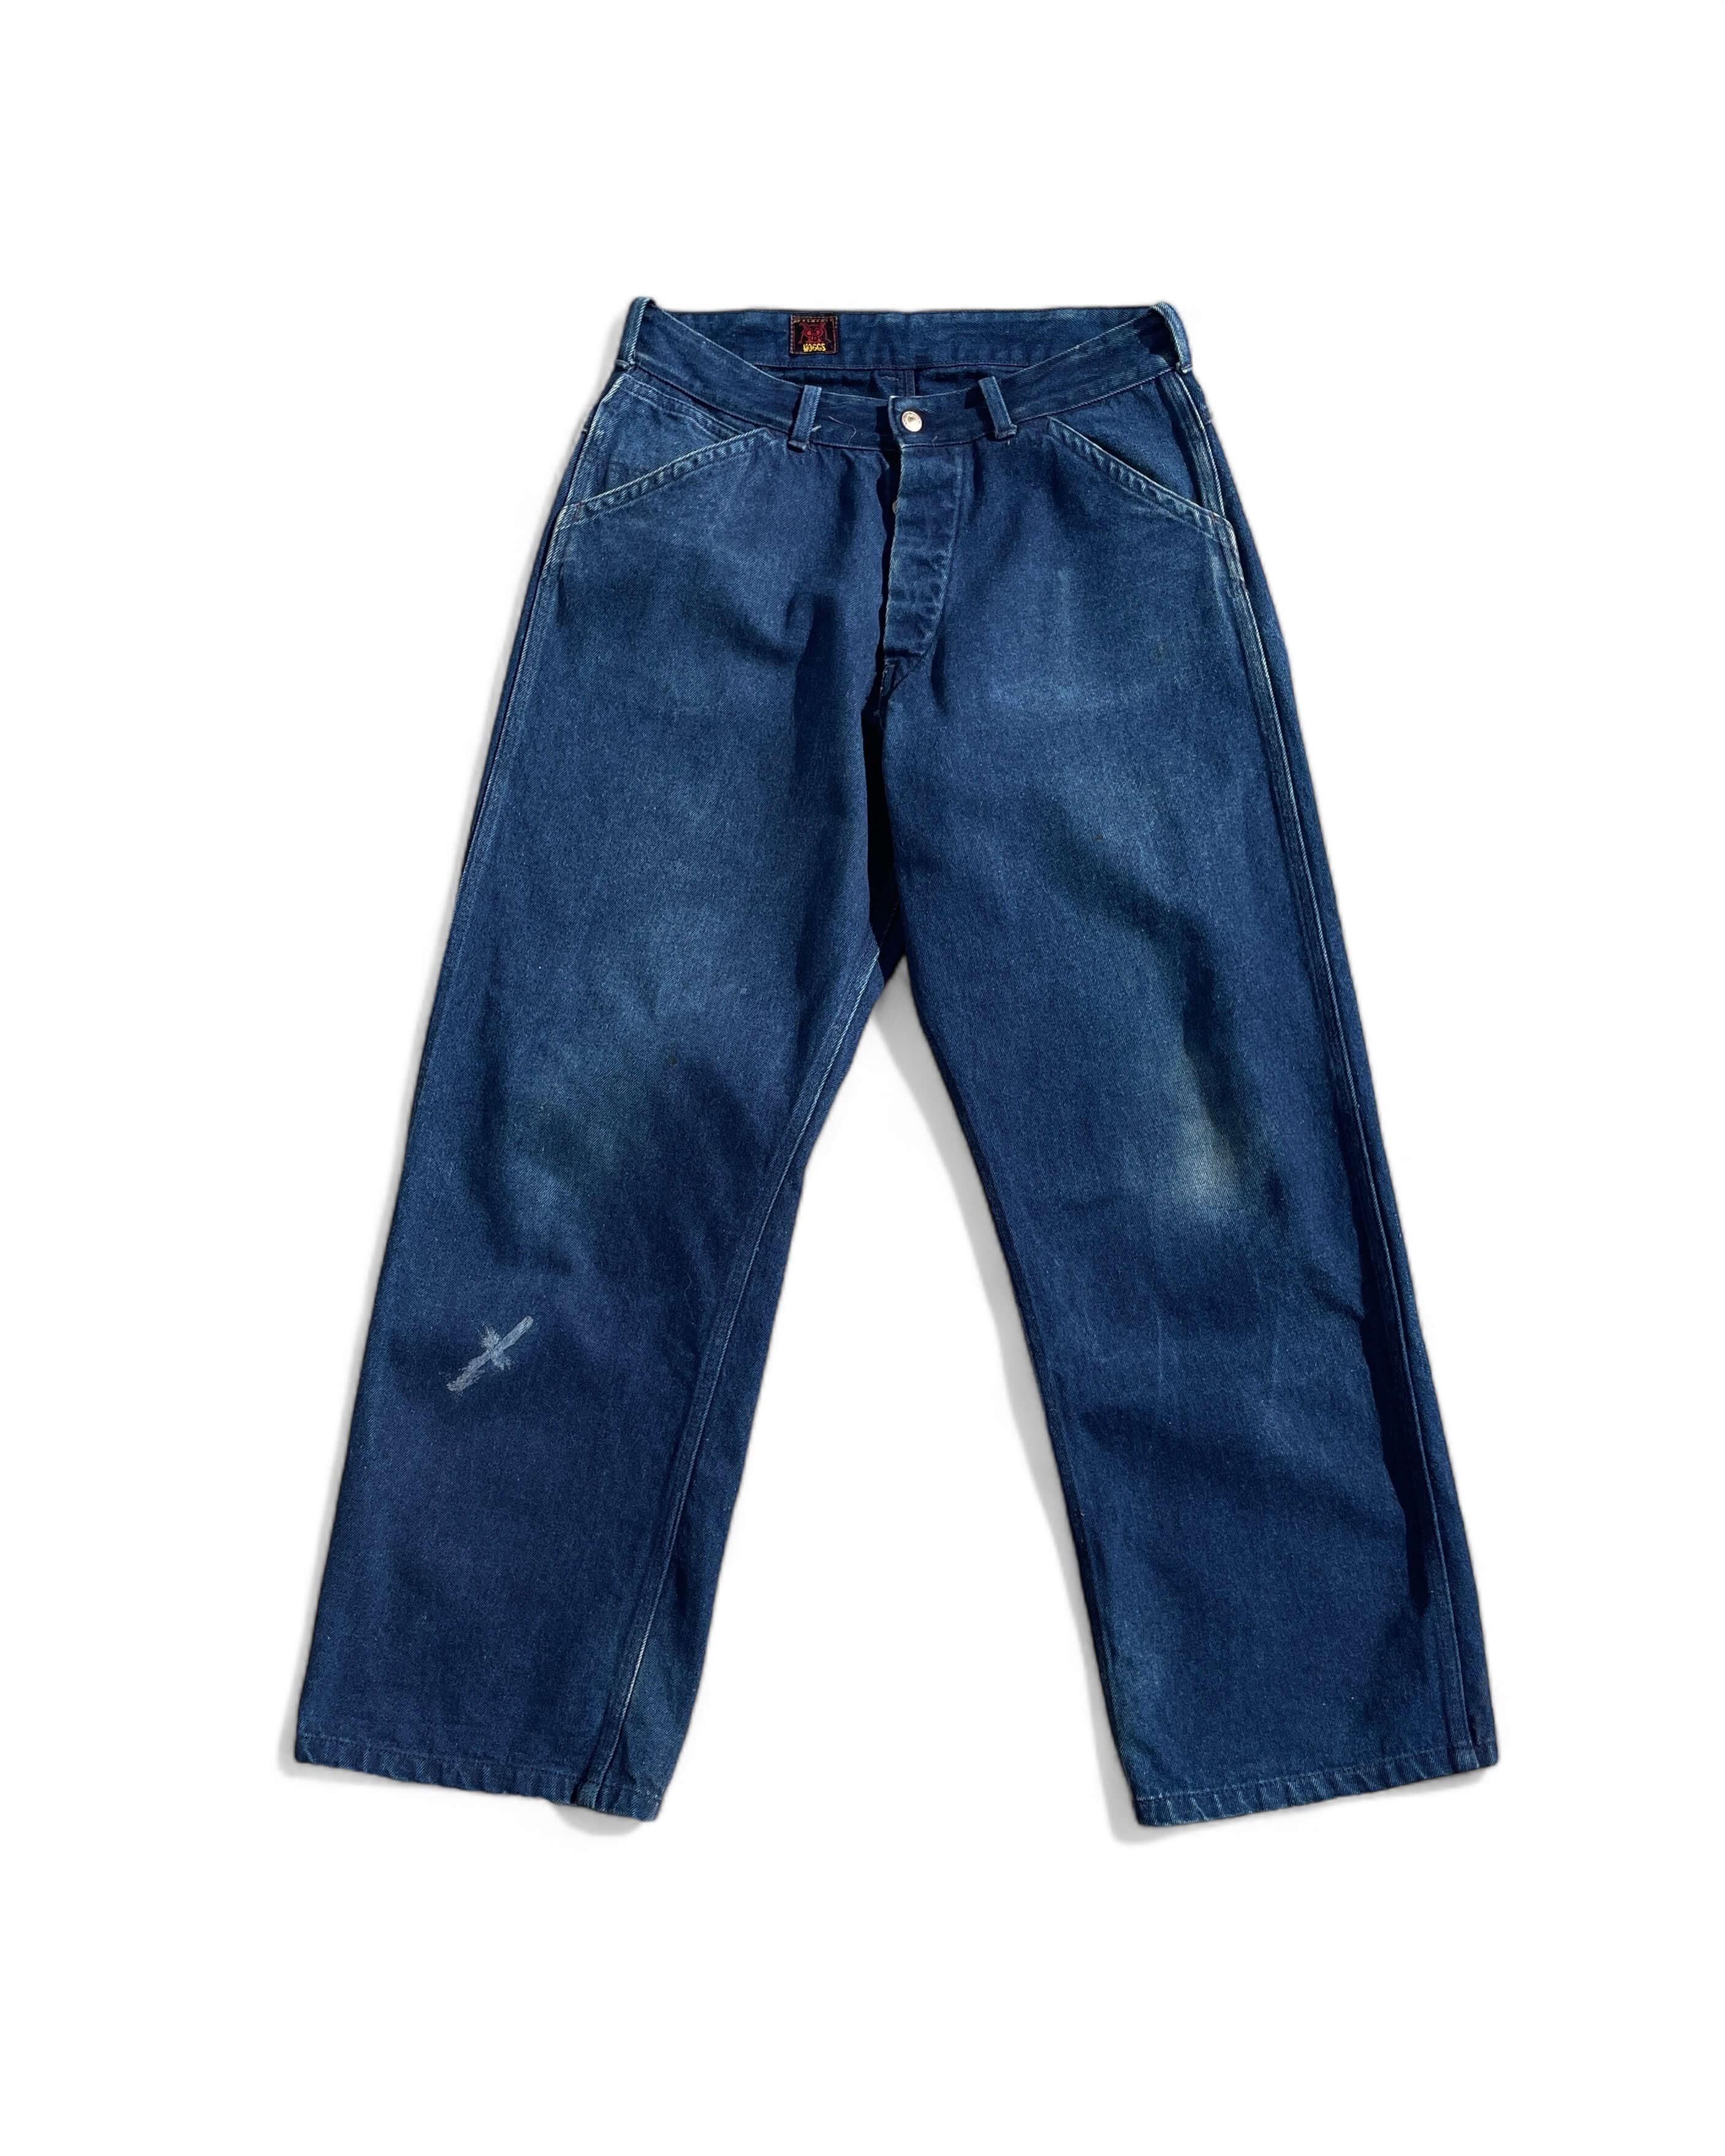 Hoggs by Nepenthes Work Denim Pants